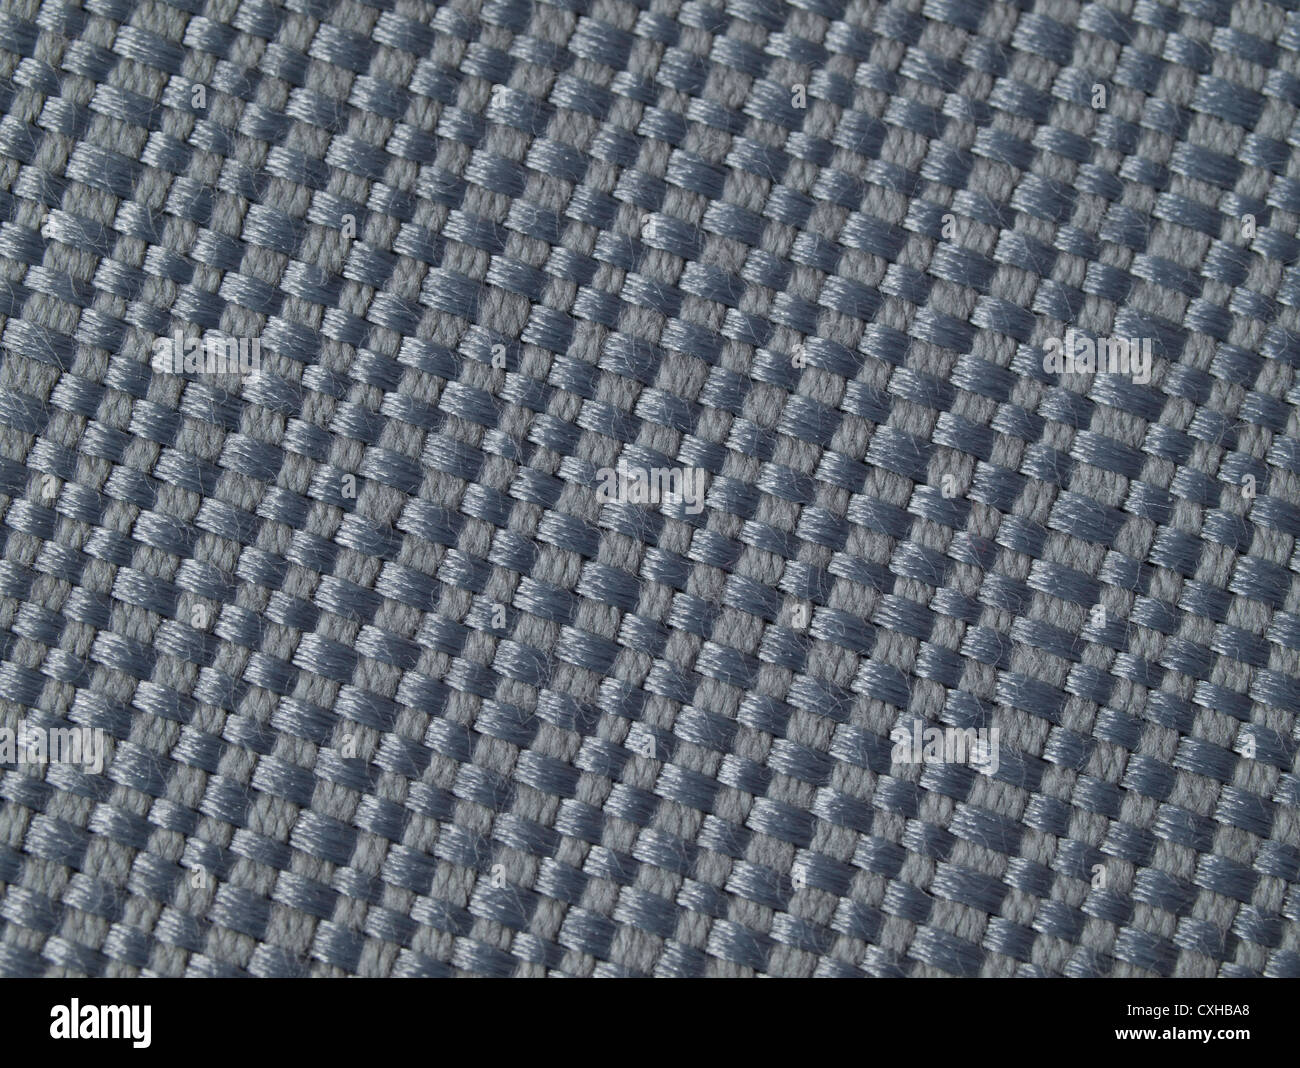 Gray fiber detail, magnified Stock Photo